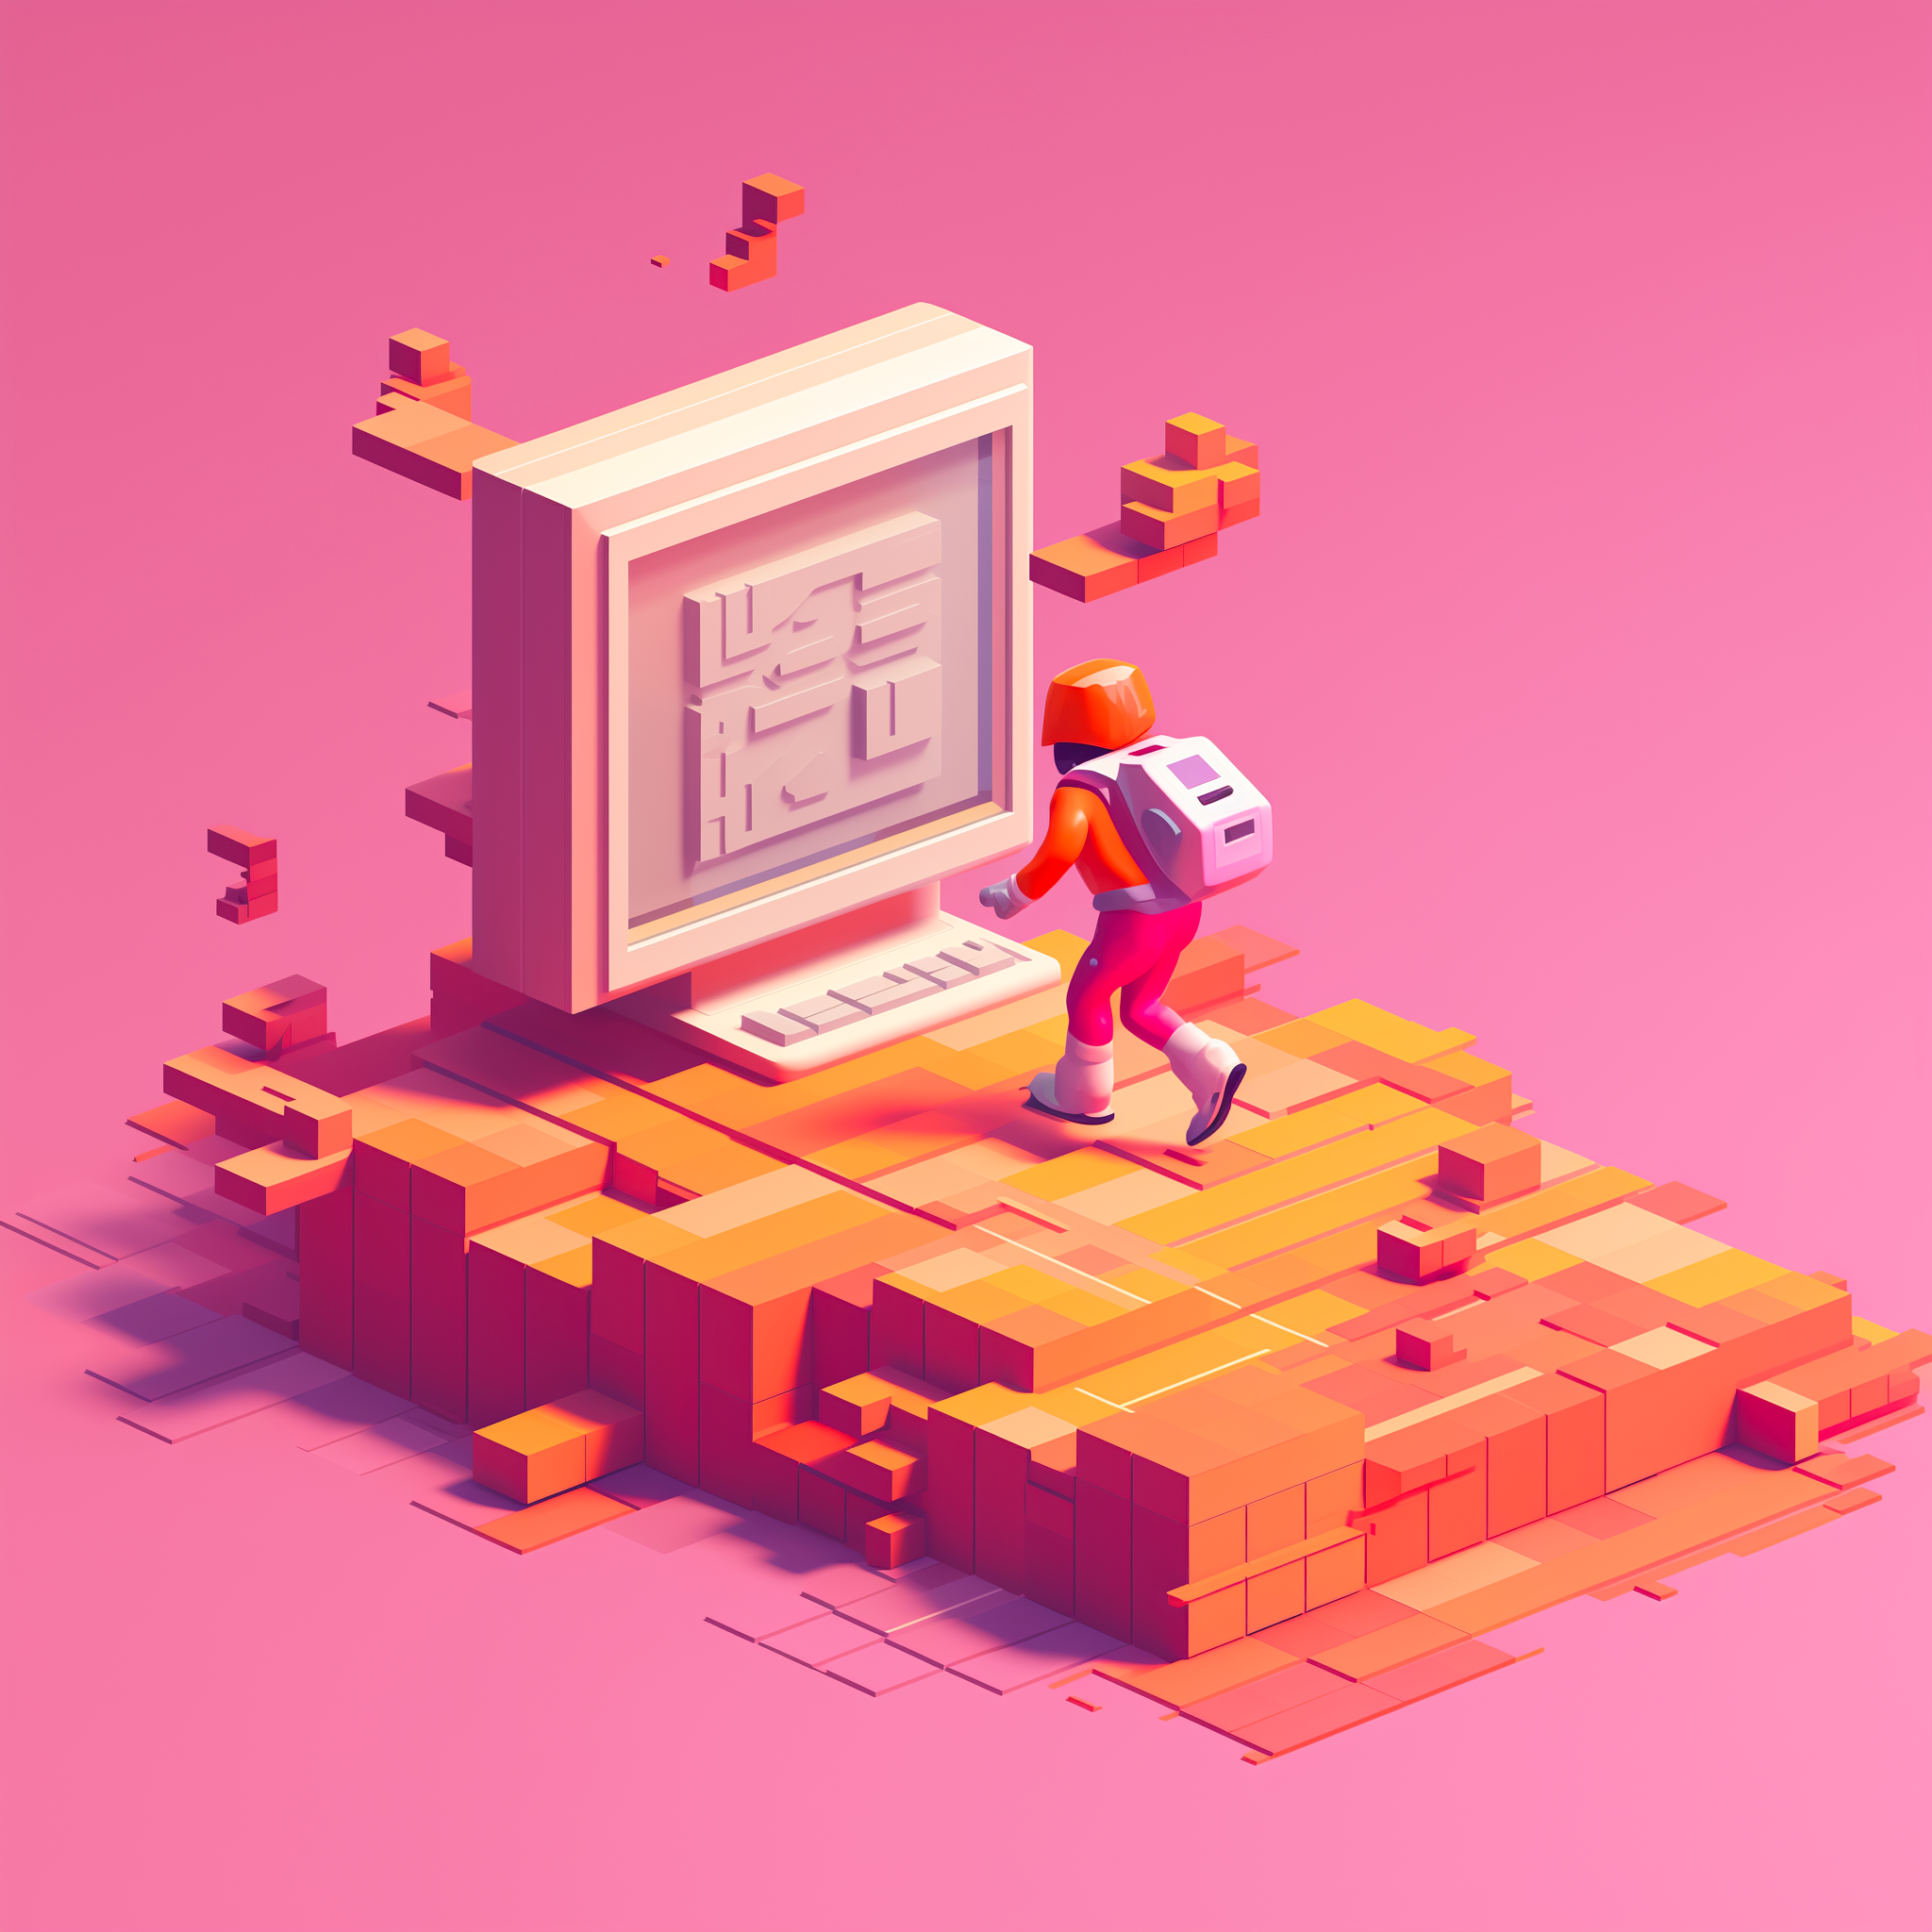 A 3D illustration of a character running to a computer on an island of cubes.